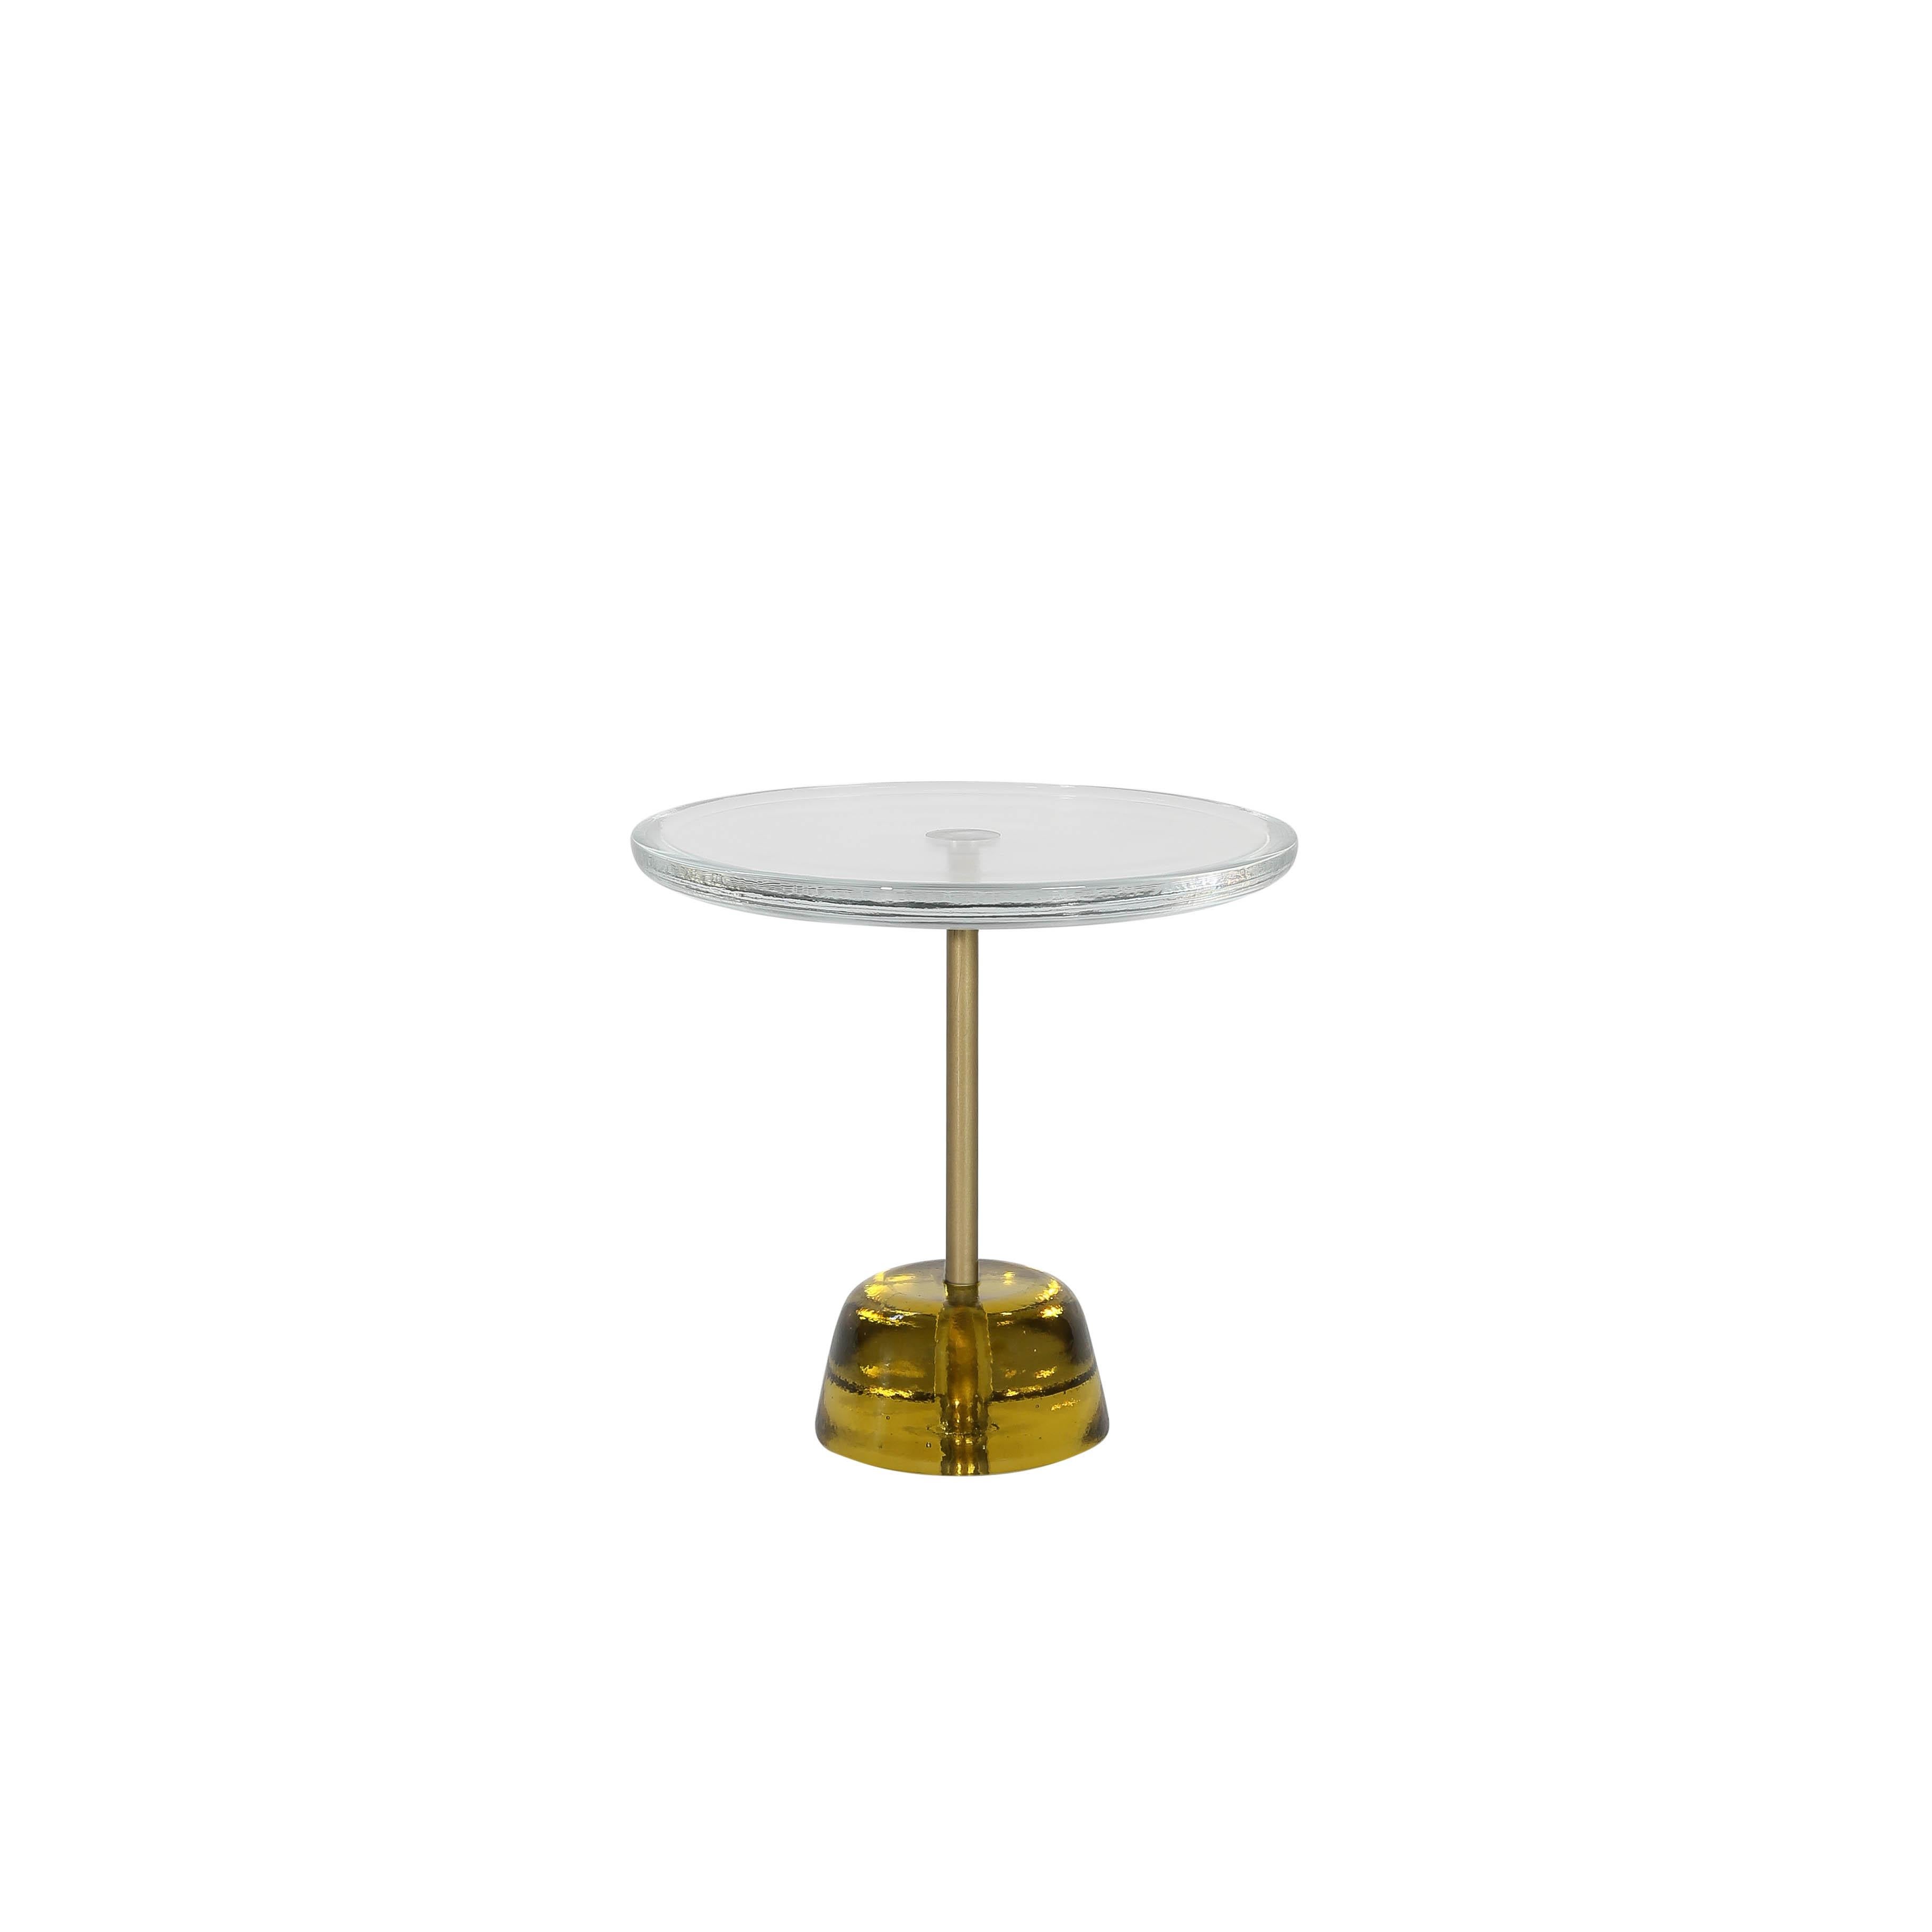 German Pina Low Corn Yellow Brass Side Table by Pulpo